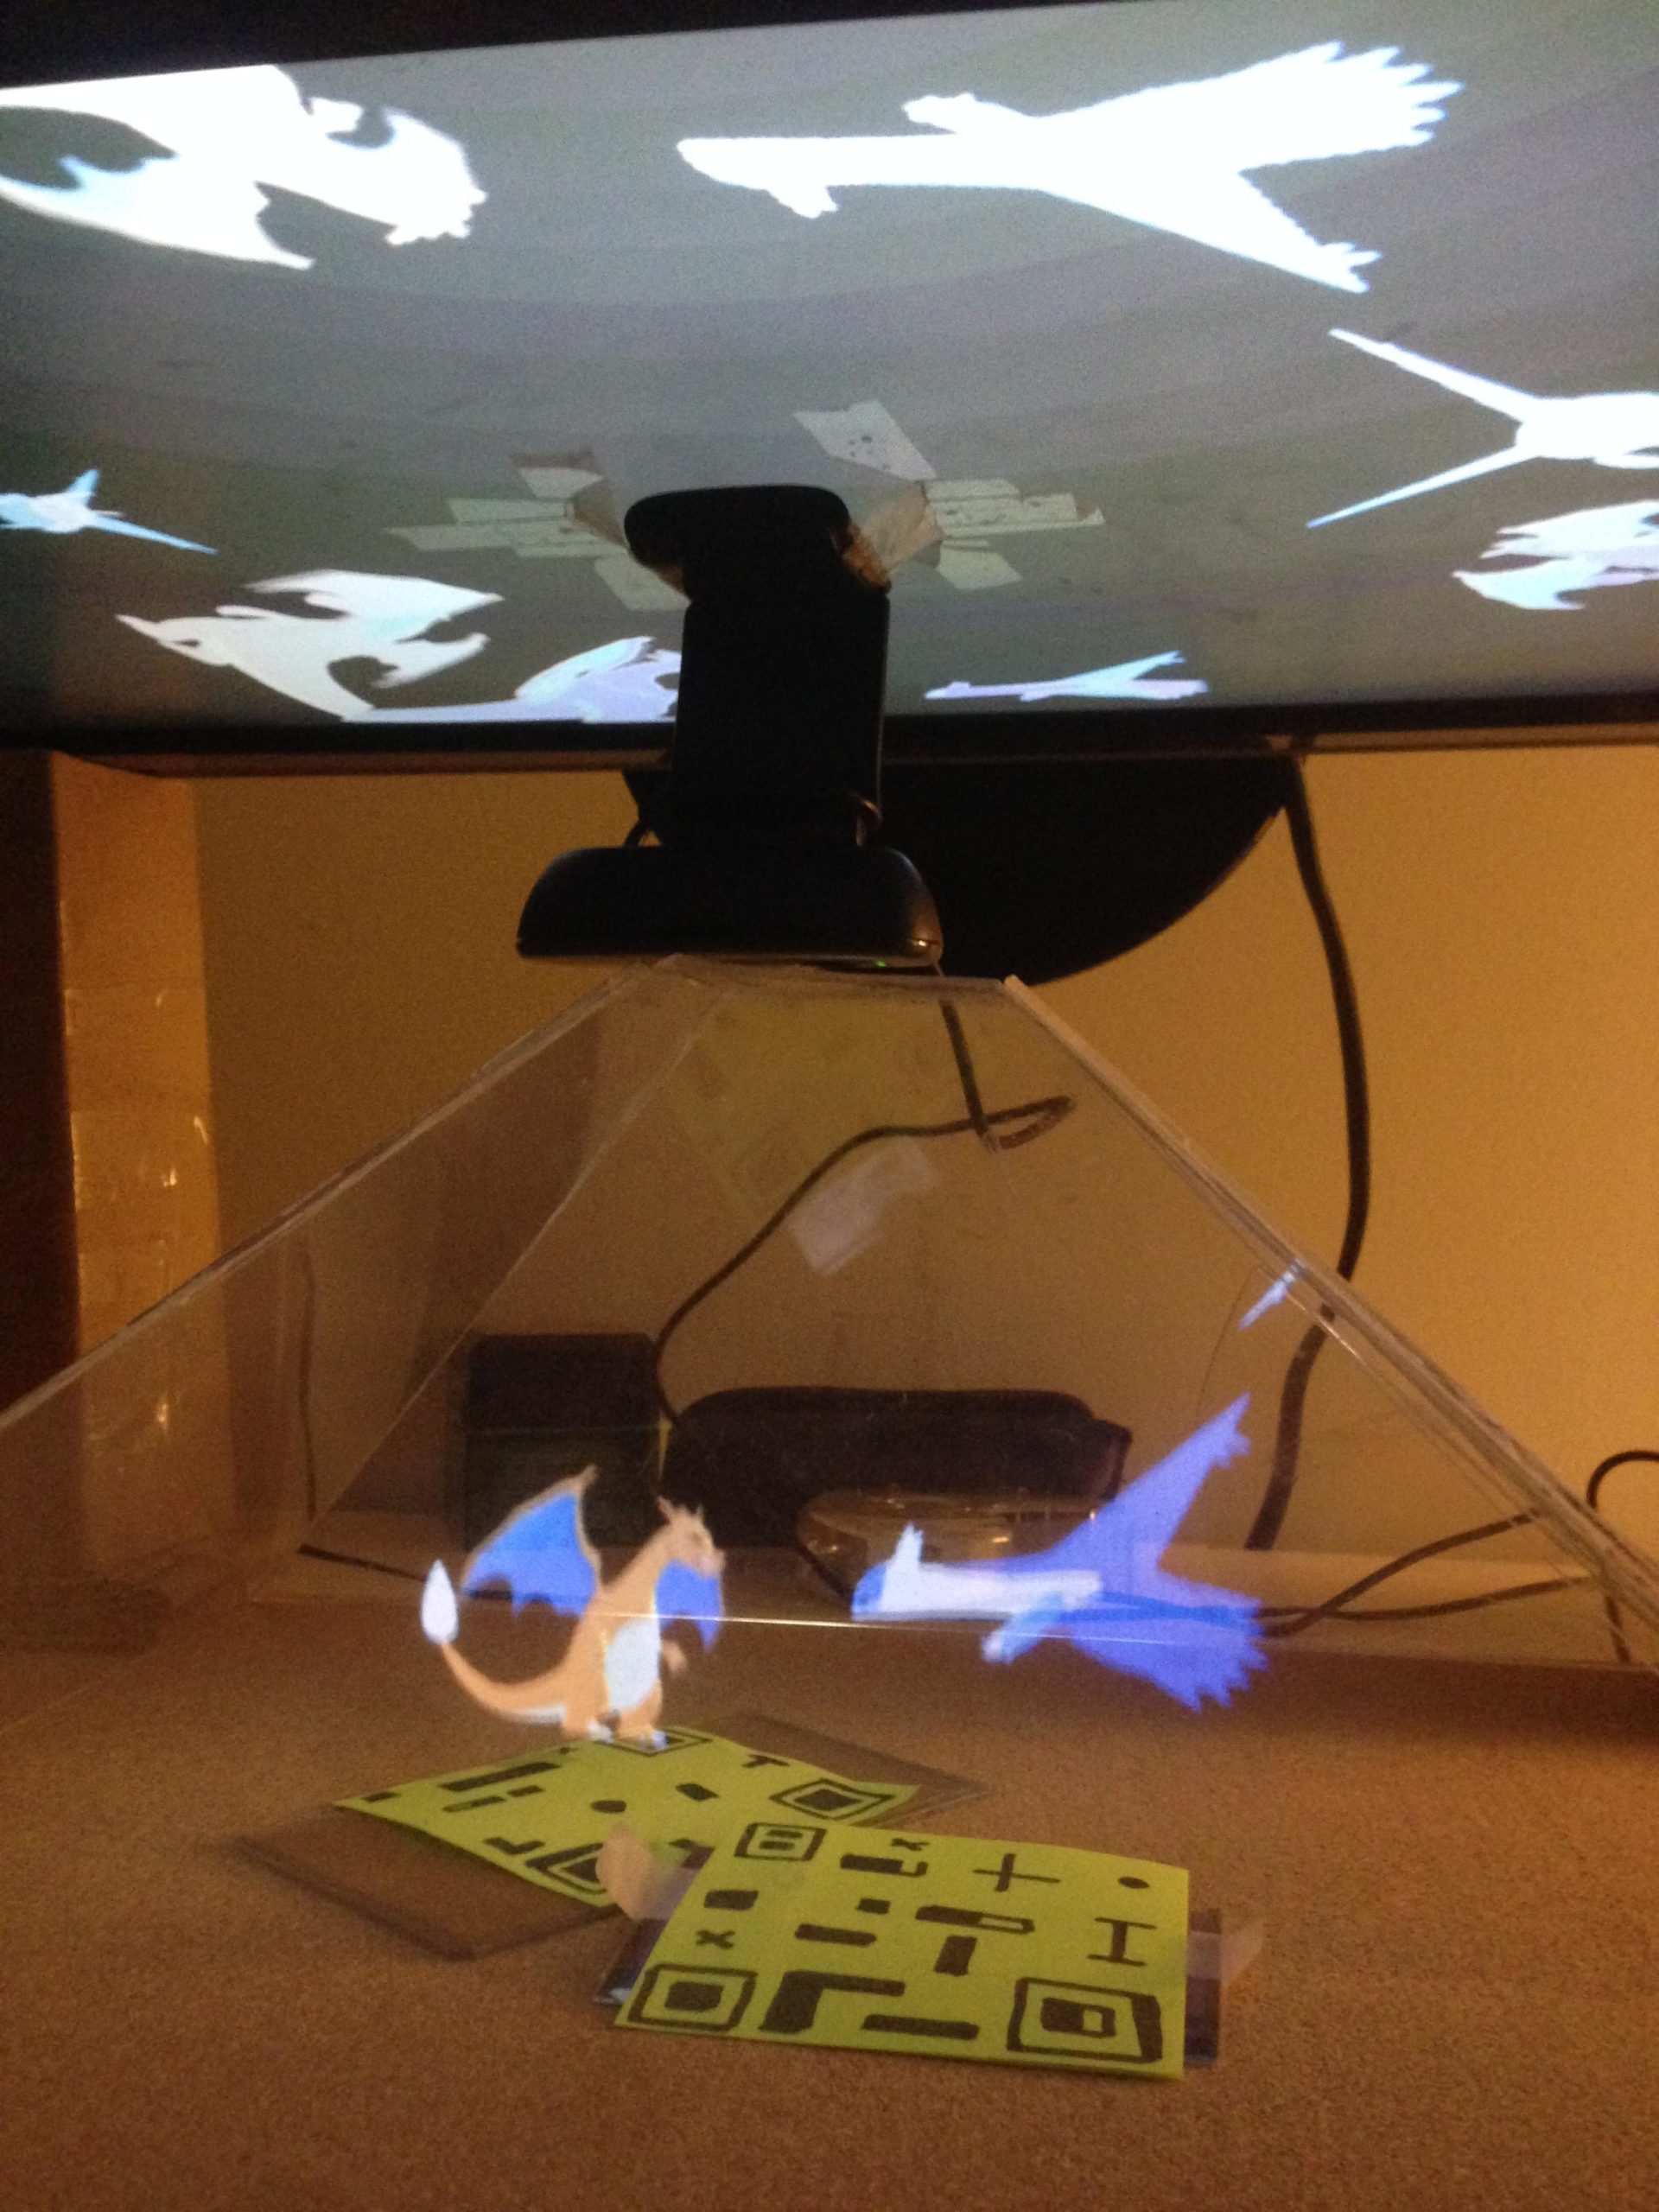 Fan Creates Awesome Holographic Pokémon Projections